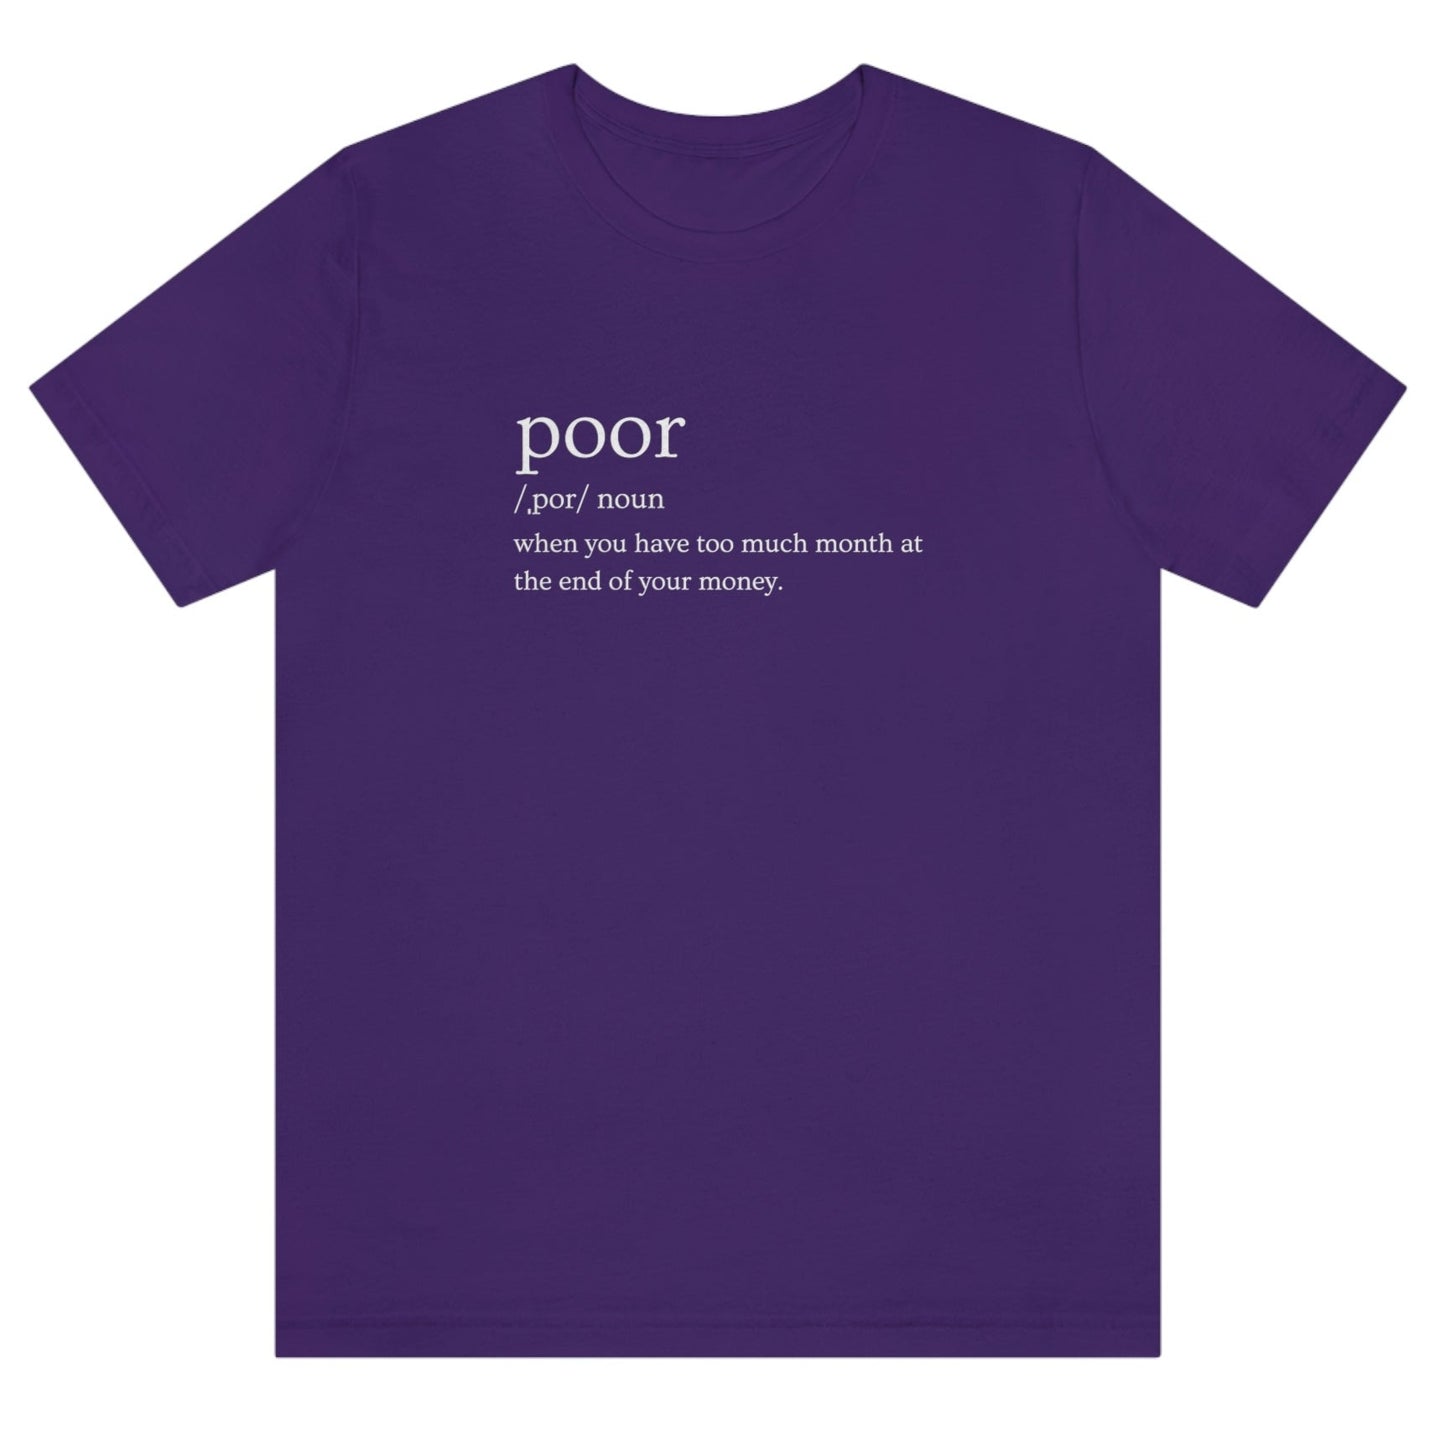 poor-when-you-have-too-much-month-at-the-end-of-your-money-team-purple-t-shirt